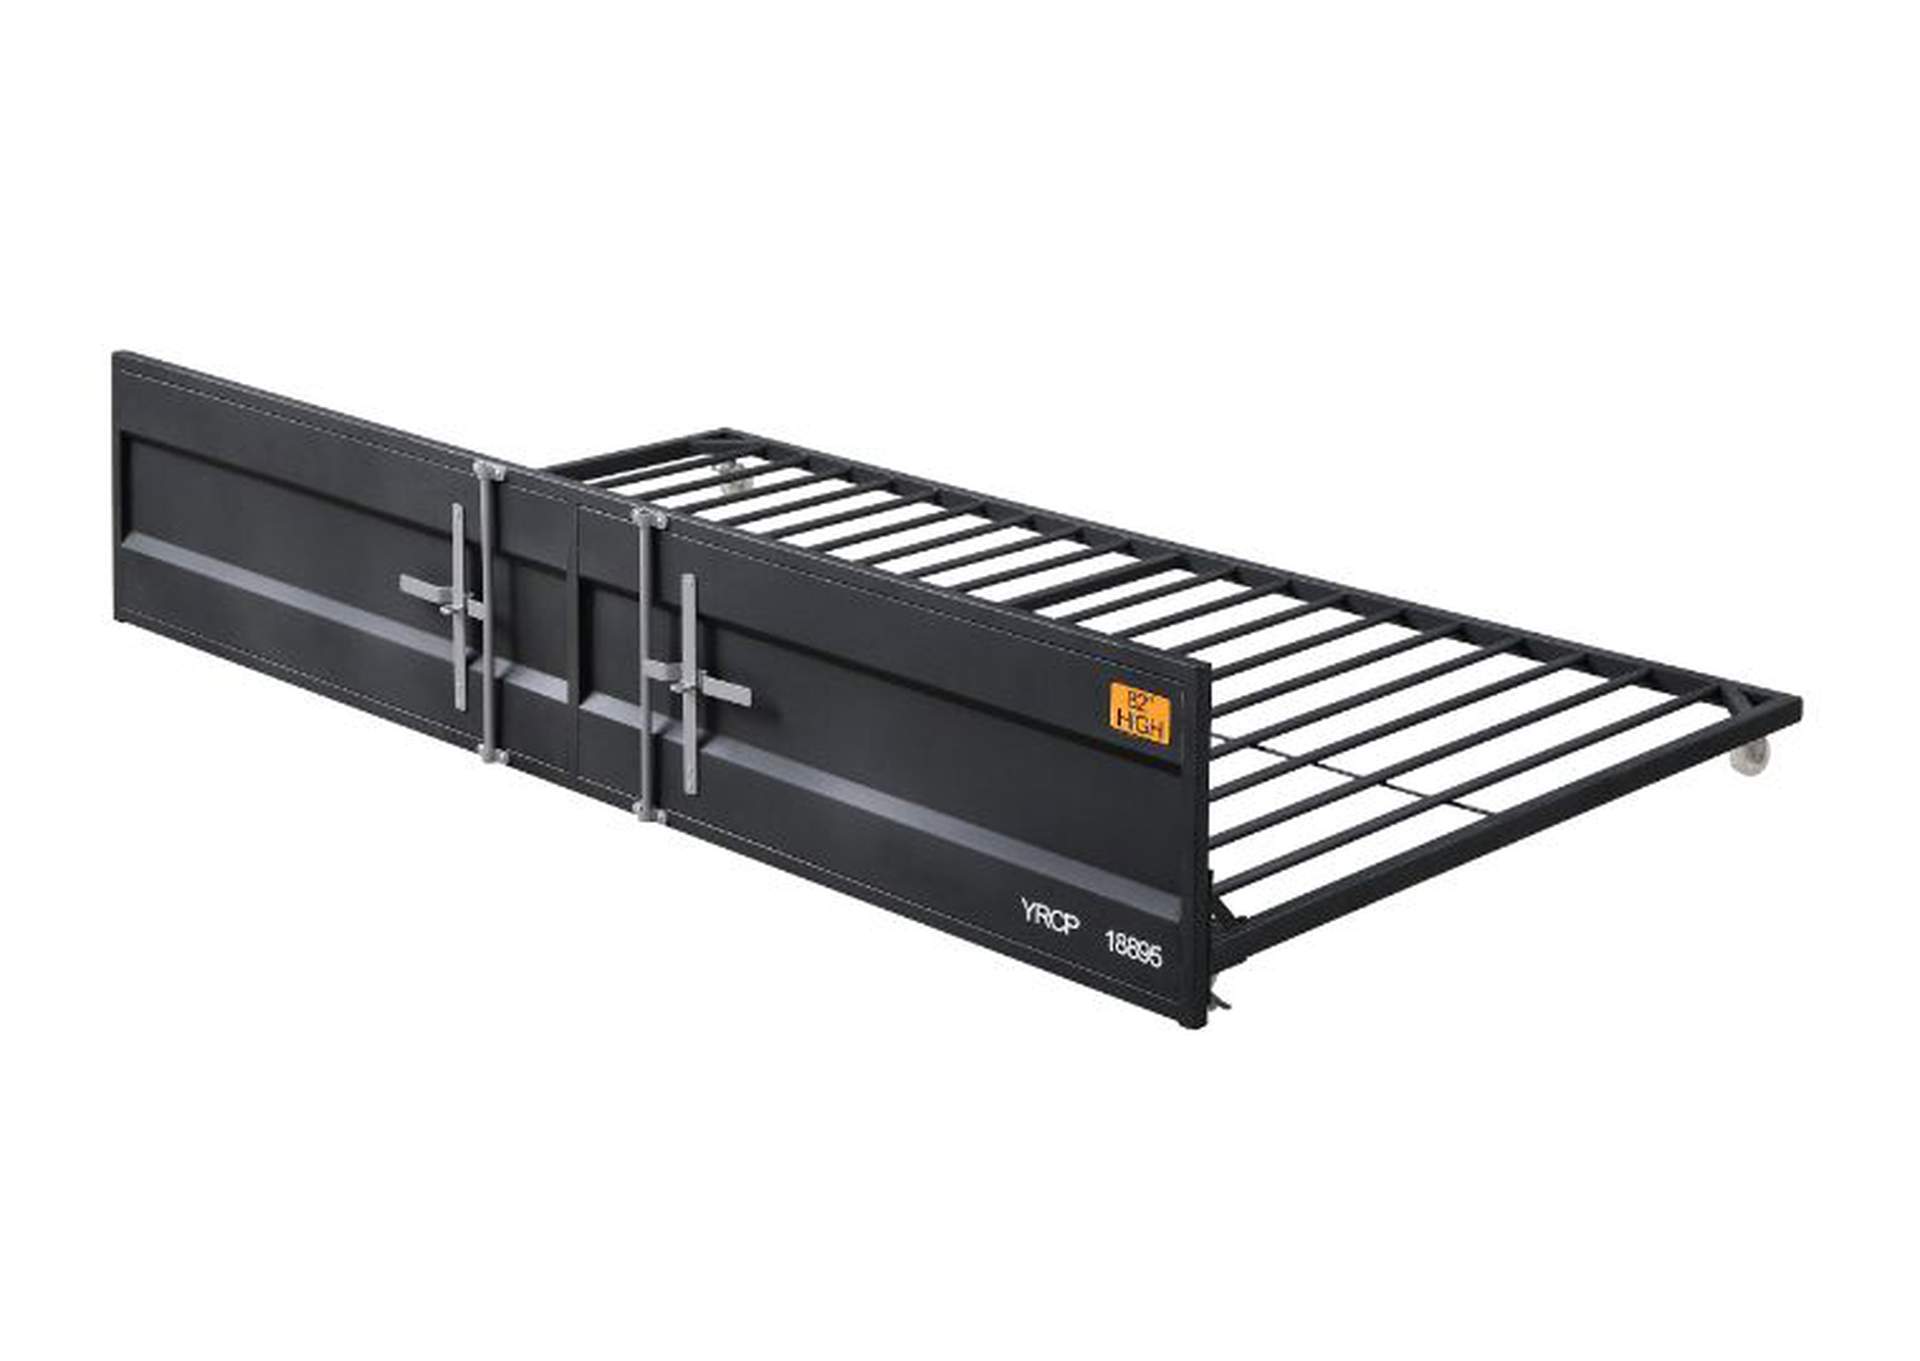 Cargo Daybed,Acme